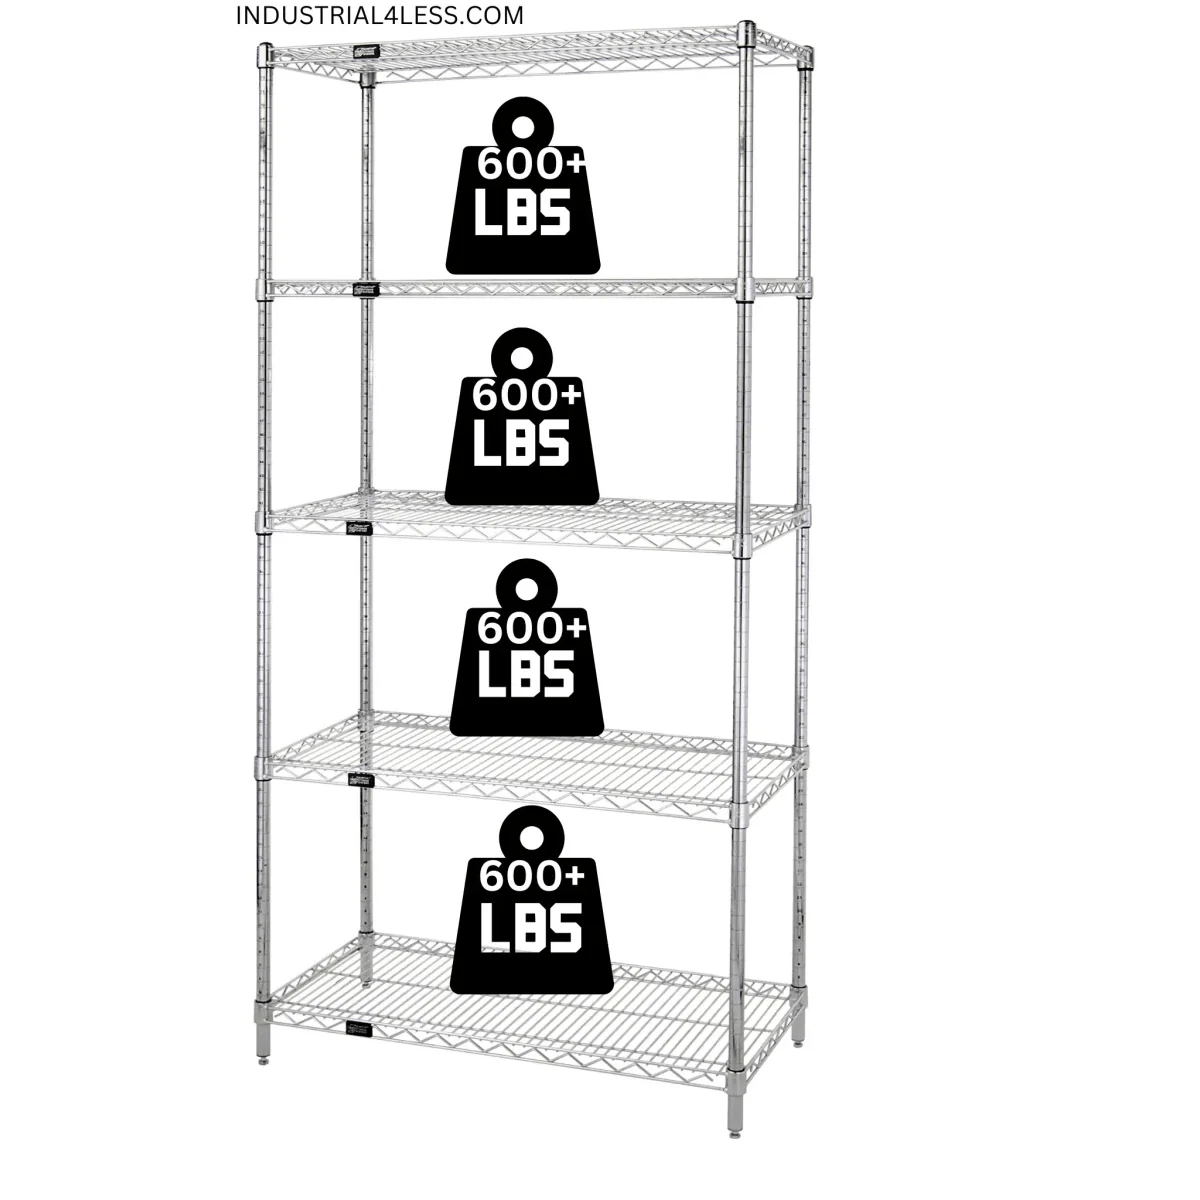 24" x 42" Stainless Steel Wire Shelving Unit - Industrial 4 Less - 24425S-5